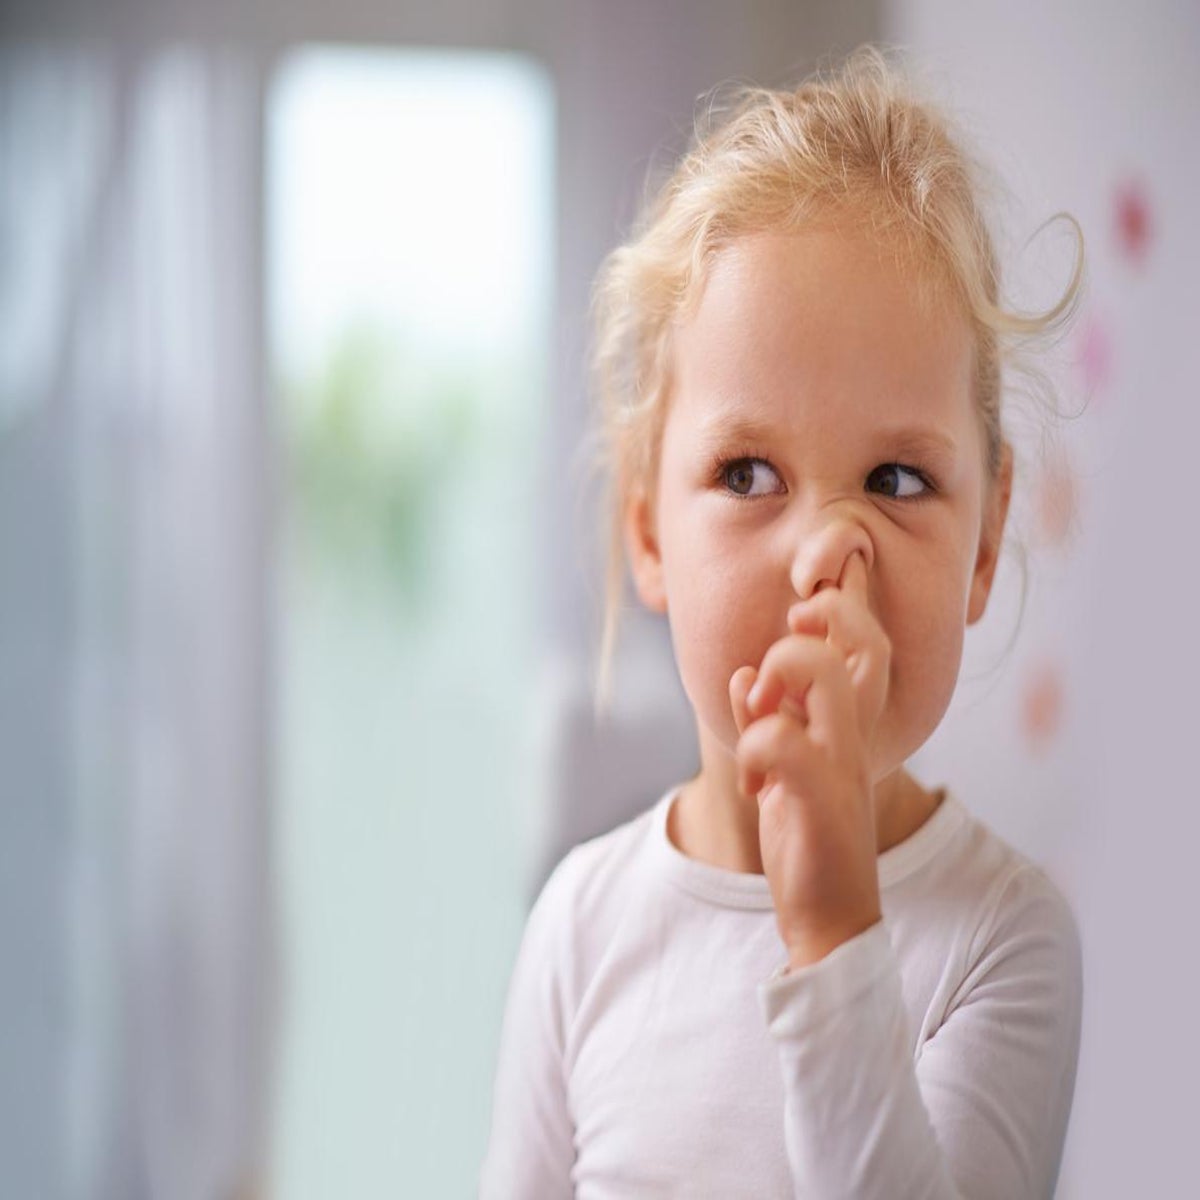 https://static.independent.co.uk/s3fs-public/thumbnails/image/2017/04/26/10/girl-picking-nose.jpg?width=1200&height=1200&fit=crop